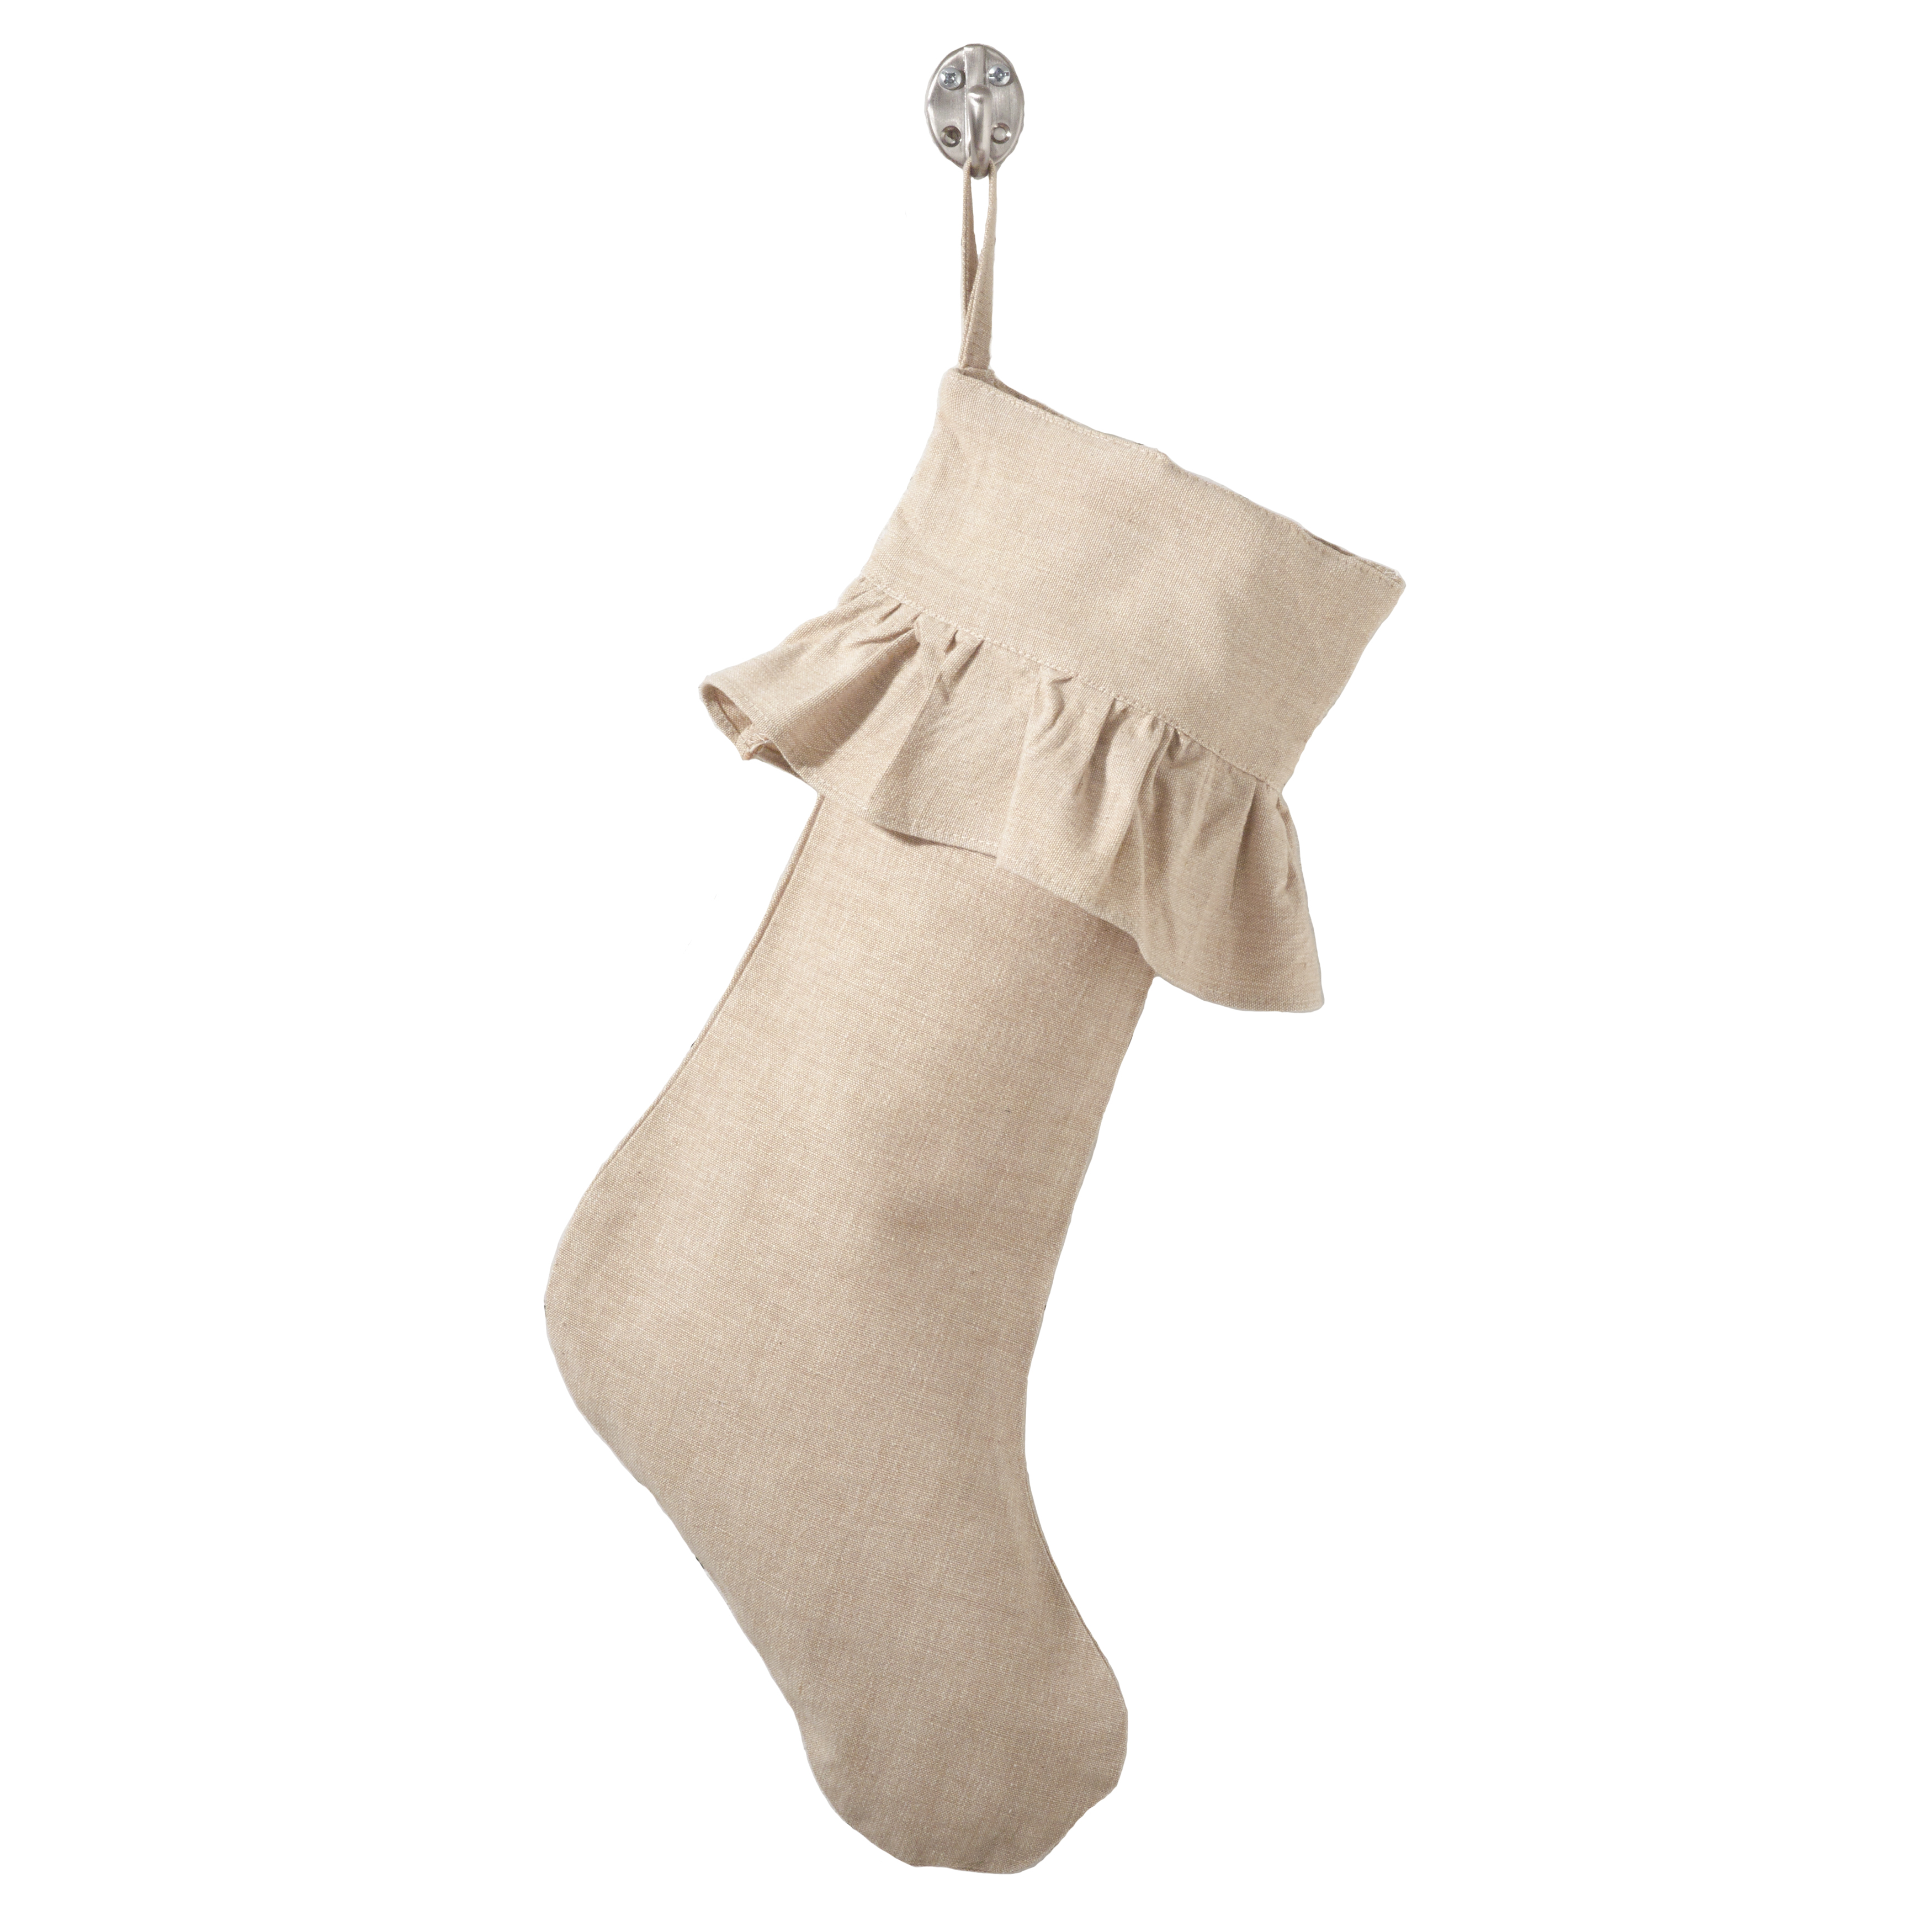 517.n1319 13 X 19 In. Ruffled Cotton Holiday Decor Stocking - Natural